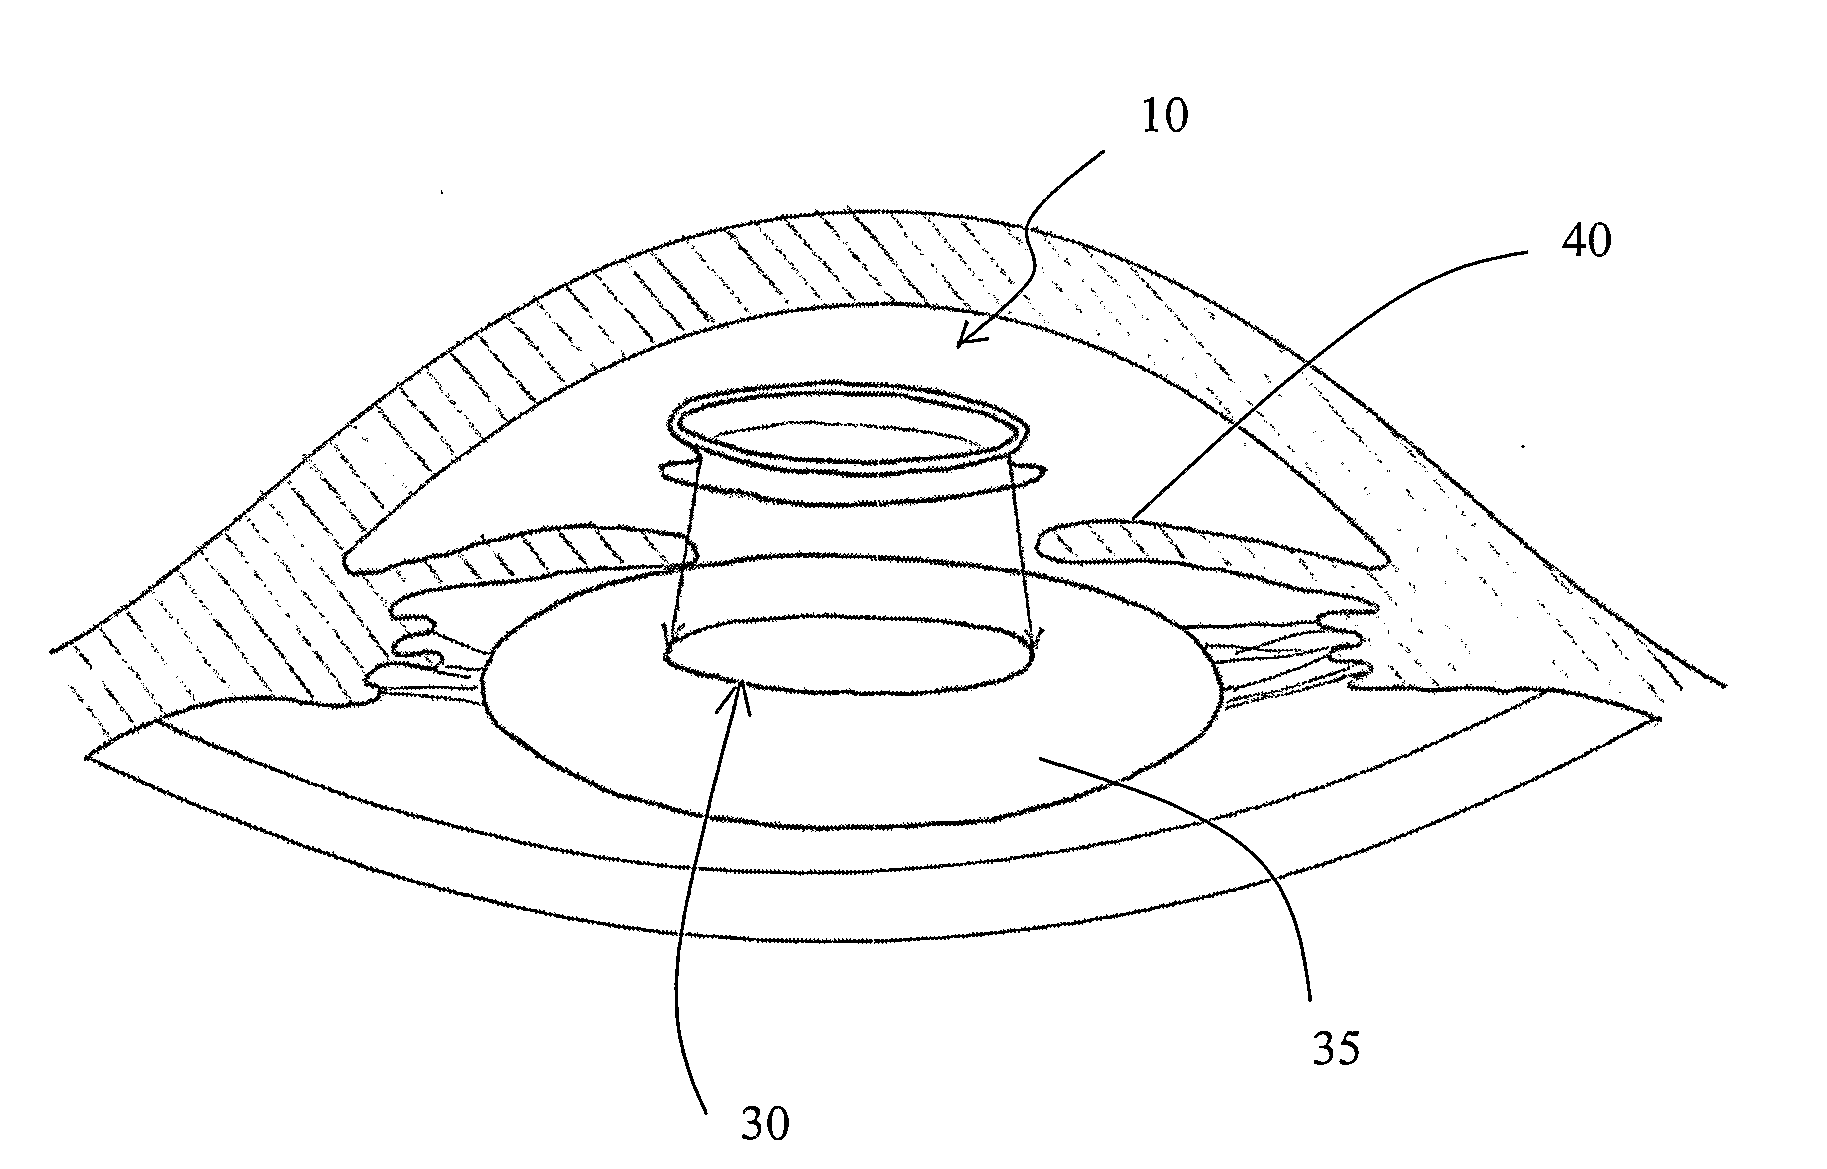 Capsular Implant For Maintaining The shape and/or Position of an Opening Formed by Capsulorhexis